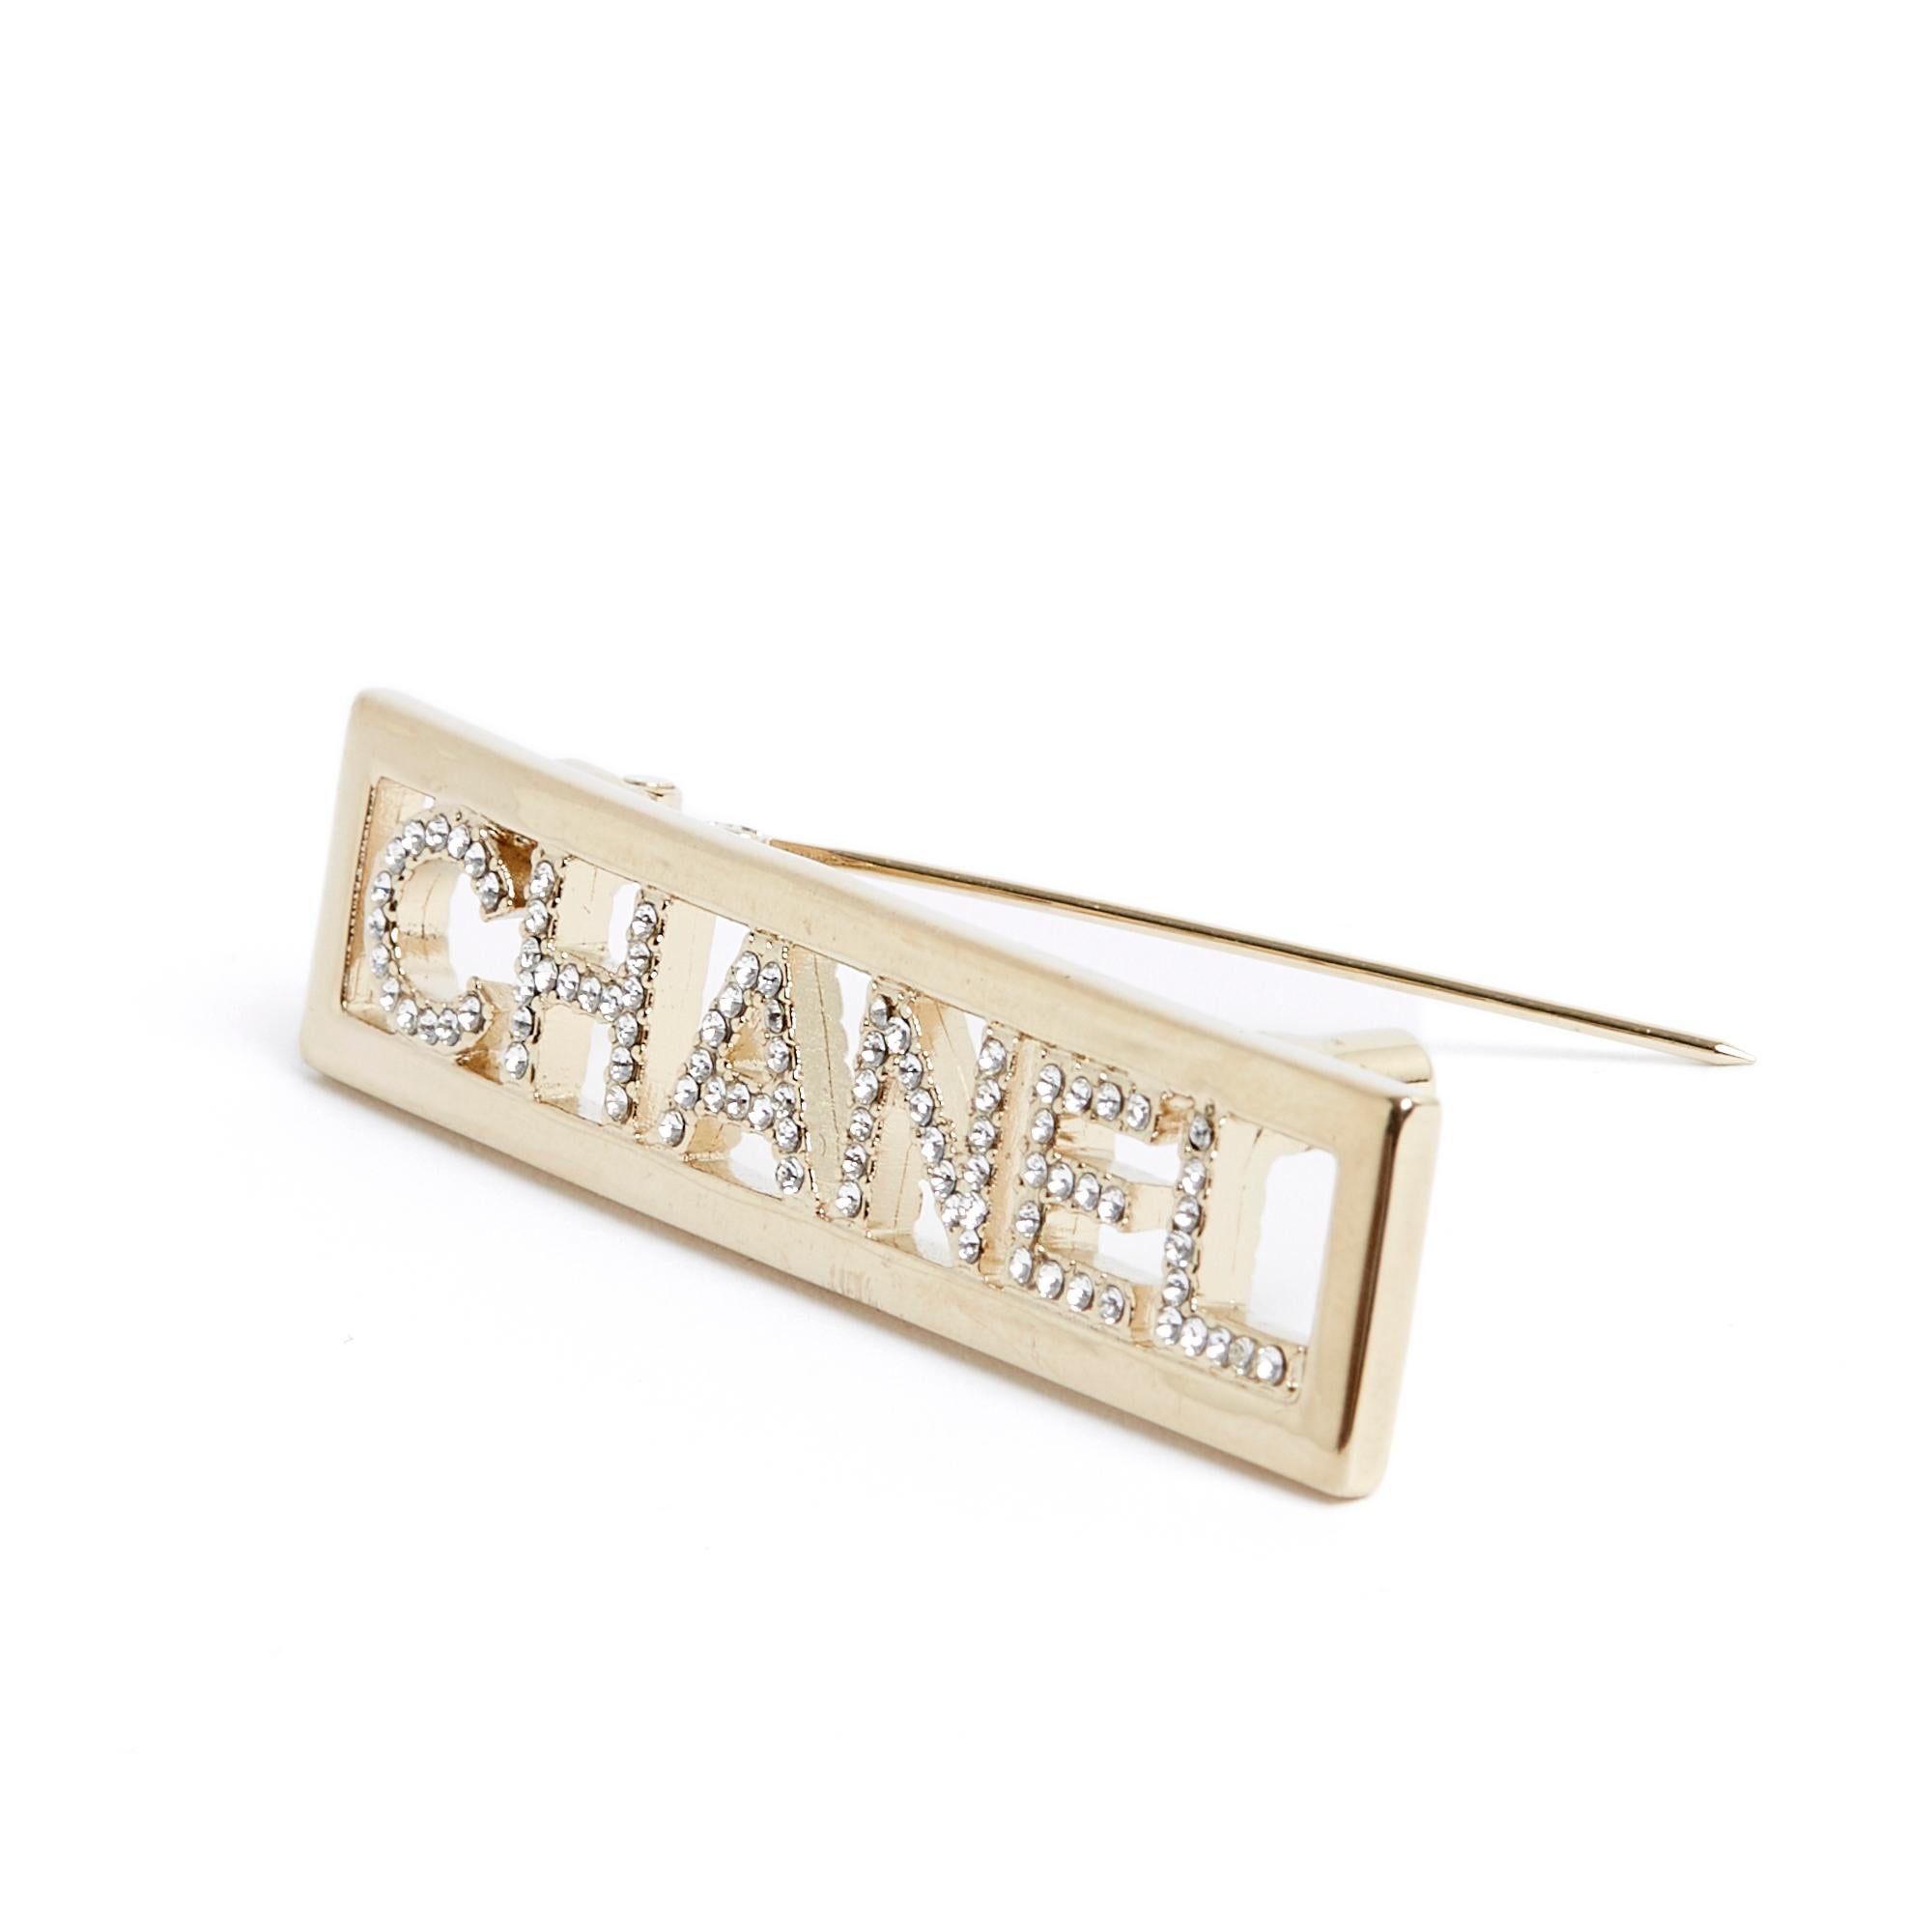 Chanel brooch in gold metal decorated with the CHANEL inscription encrusted with white rhinestones. Width 6.2 cm x height 1.5 cm. The brooch is sold without invoice or original packaging but it is in very good condition, from a very recent